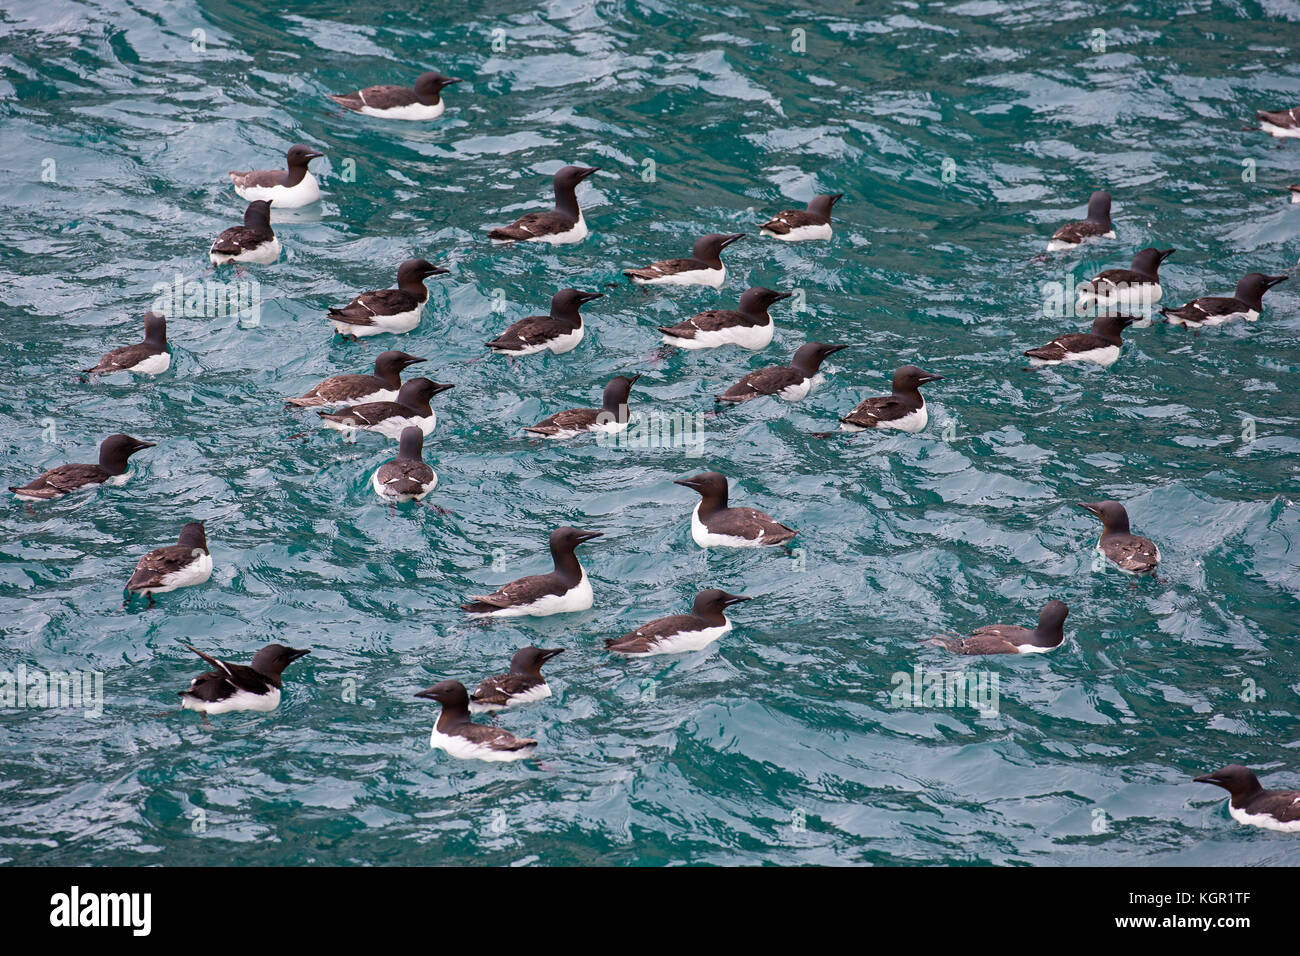 Thick-billed murres / Brünnich's guillemots (Uria lomvia) swimming in sea, native to the sub-polar regions of the Northern Hemisphere, Svalbard Stock Photo